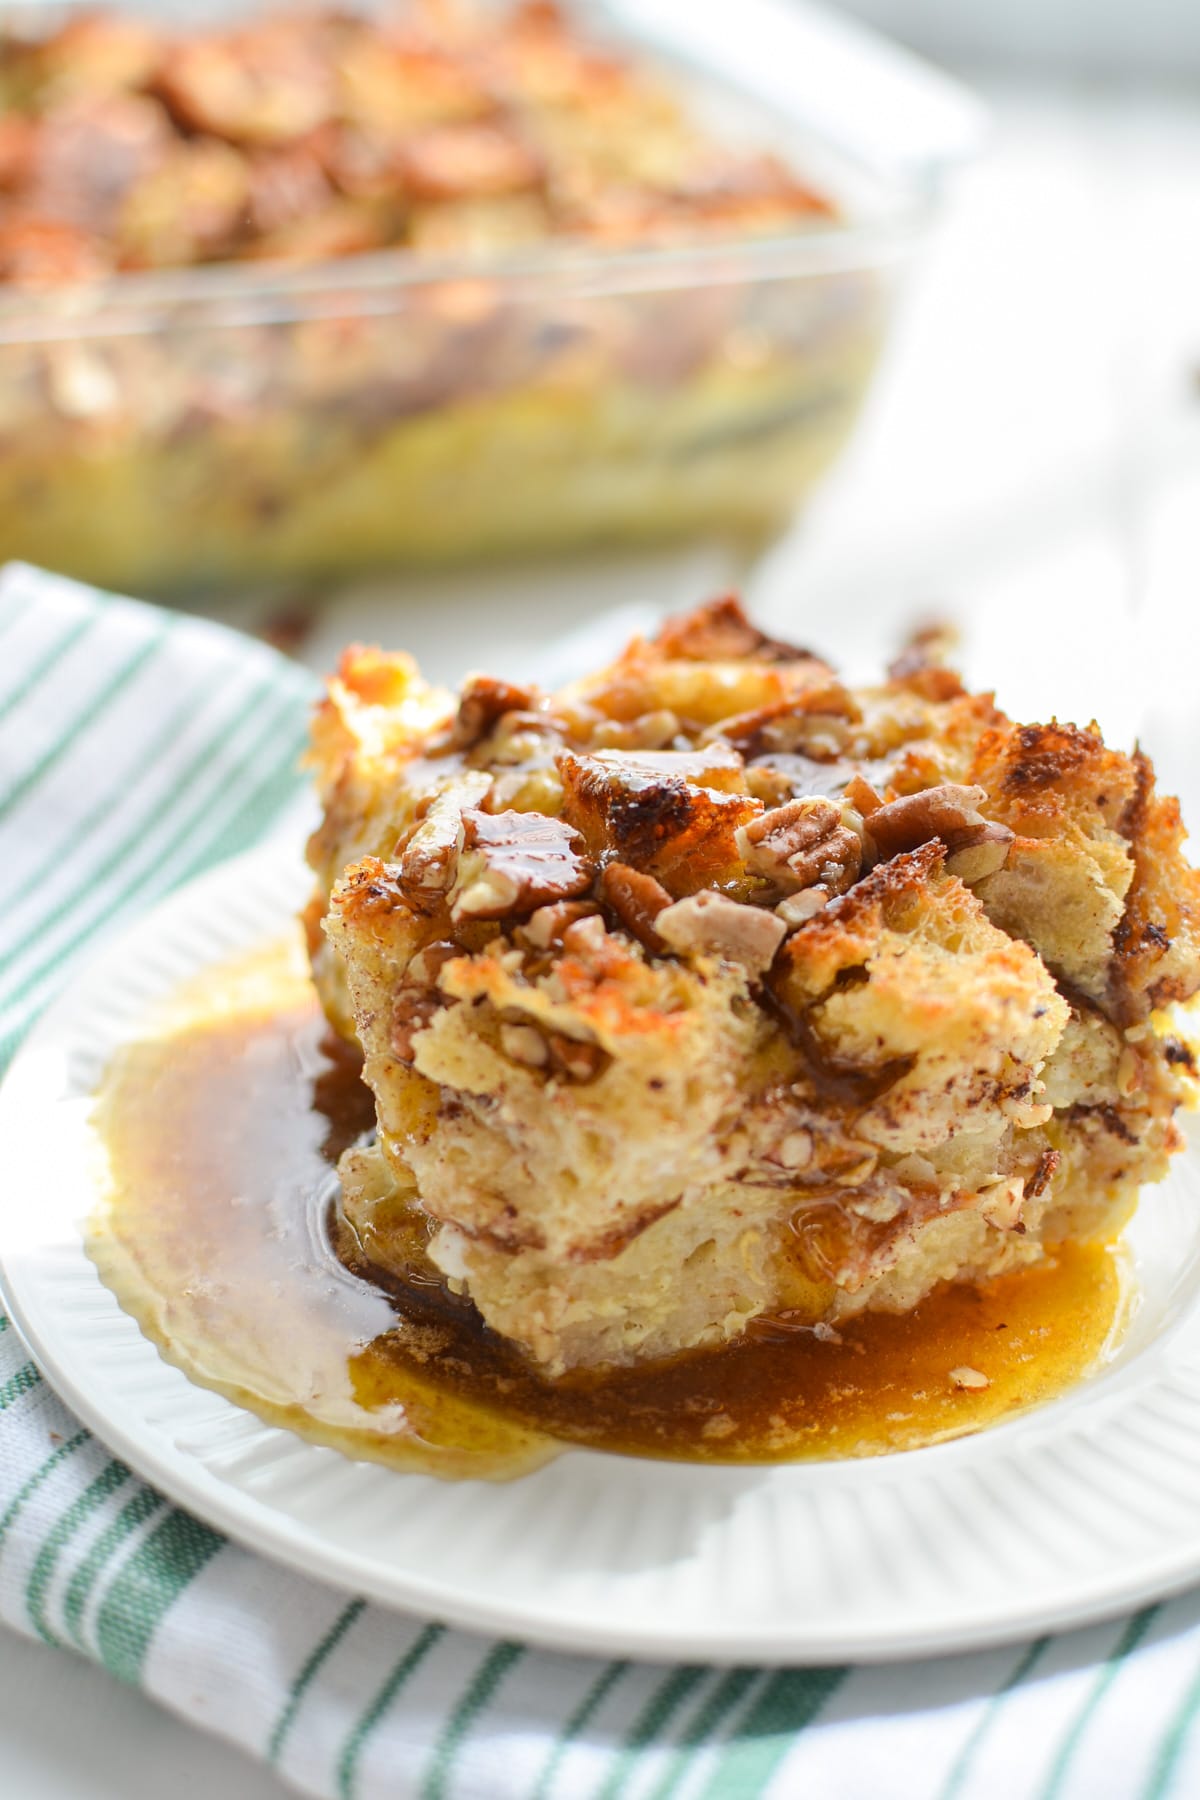 A square of bread pudding, drizzled in sauce.